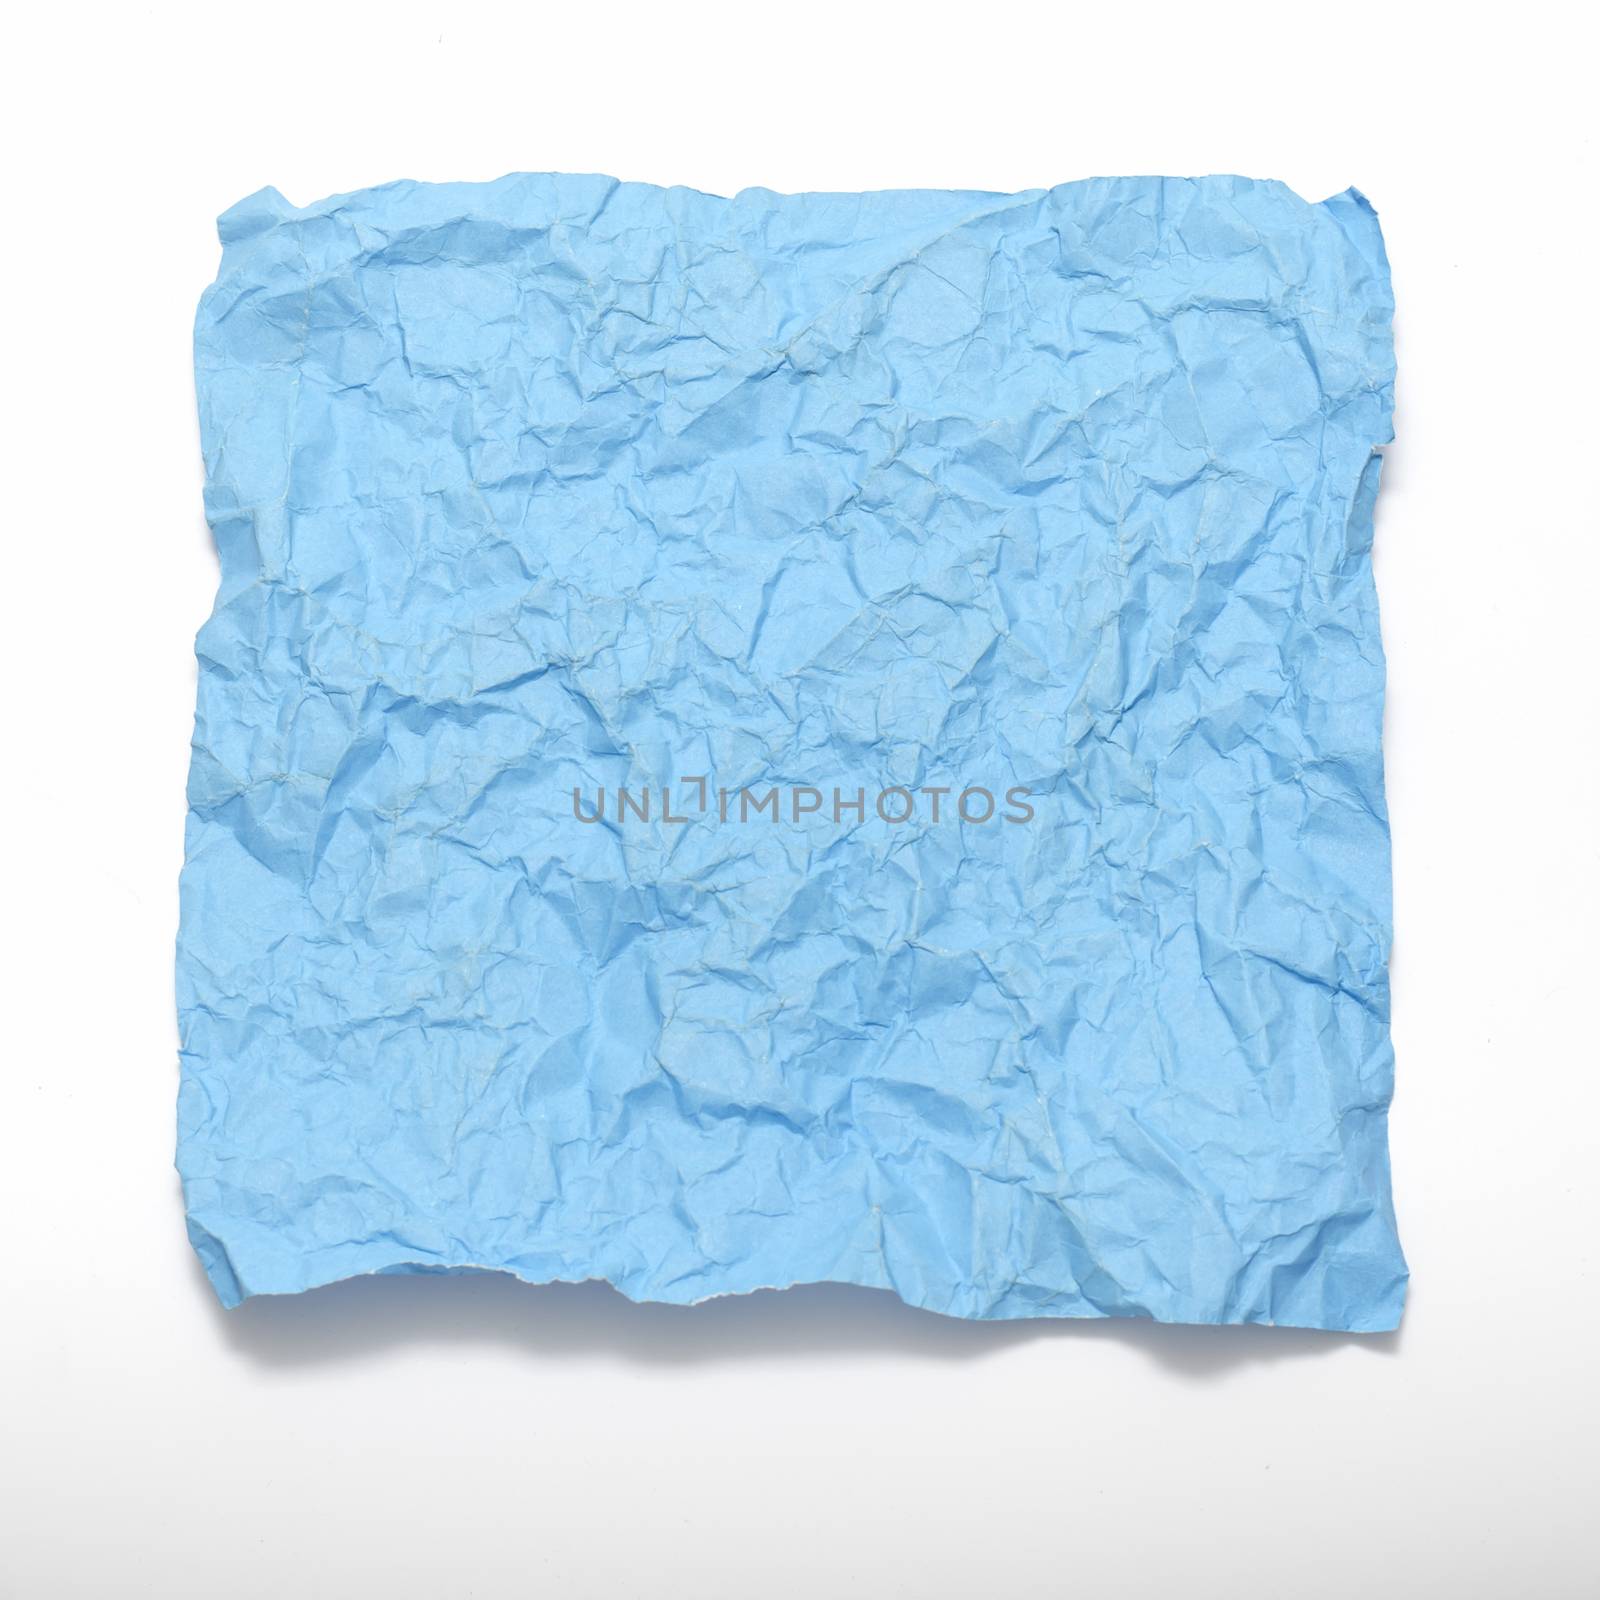 texture of wrinkled blue paper background